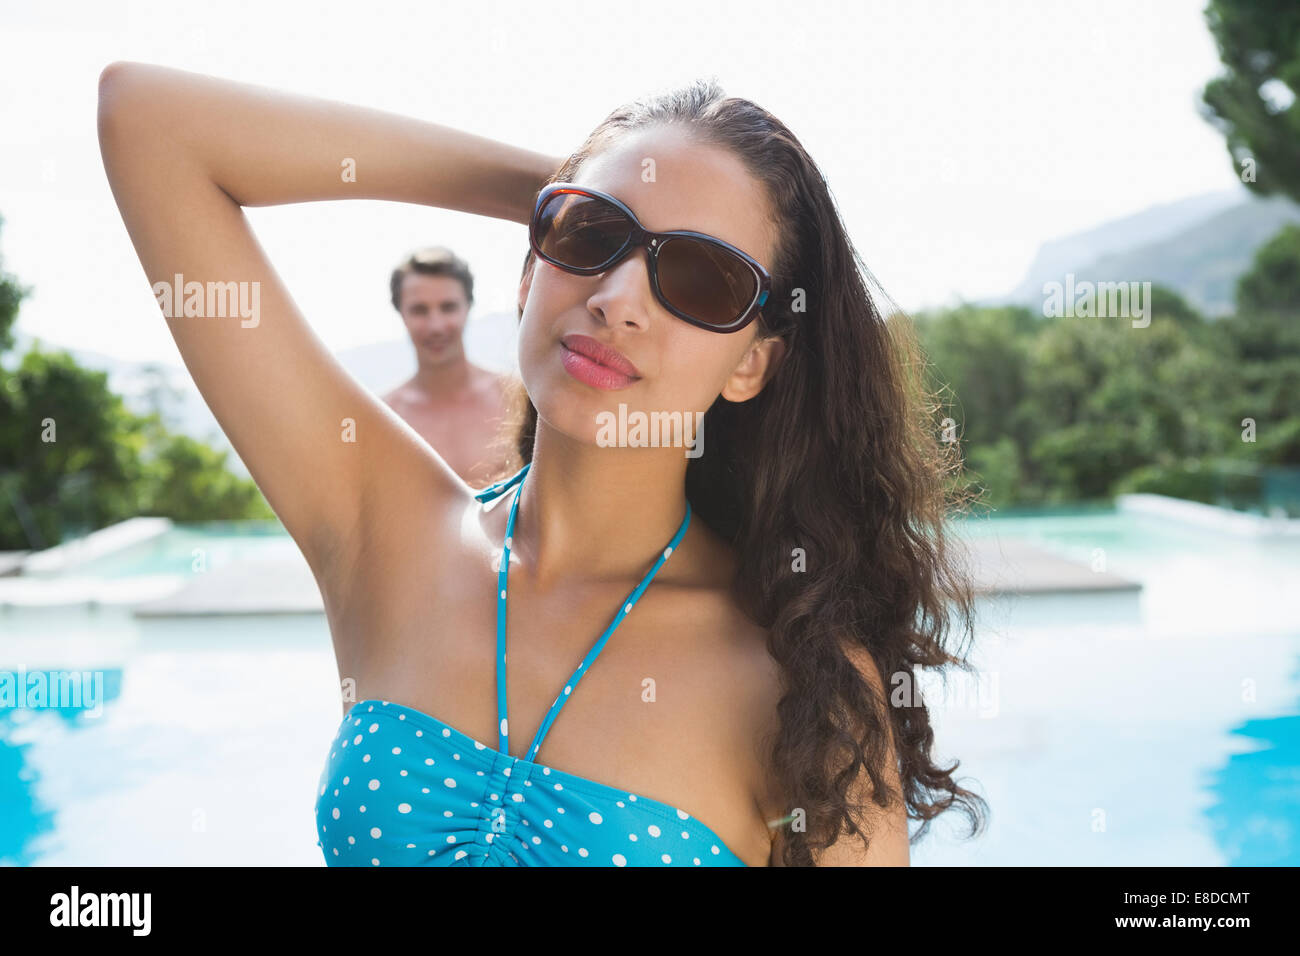 Beautiful young woman by swimming pool Stock Photo